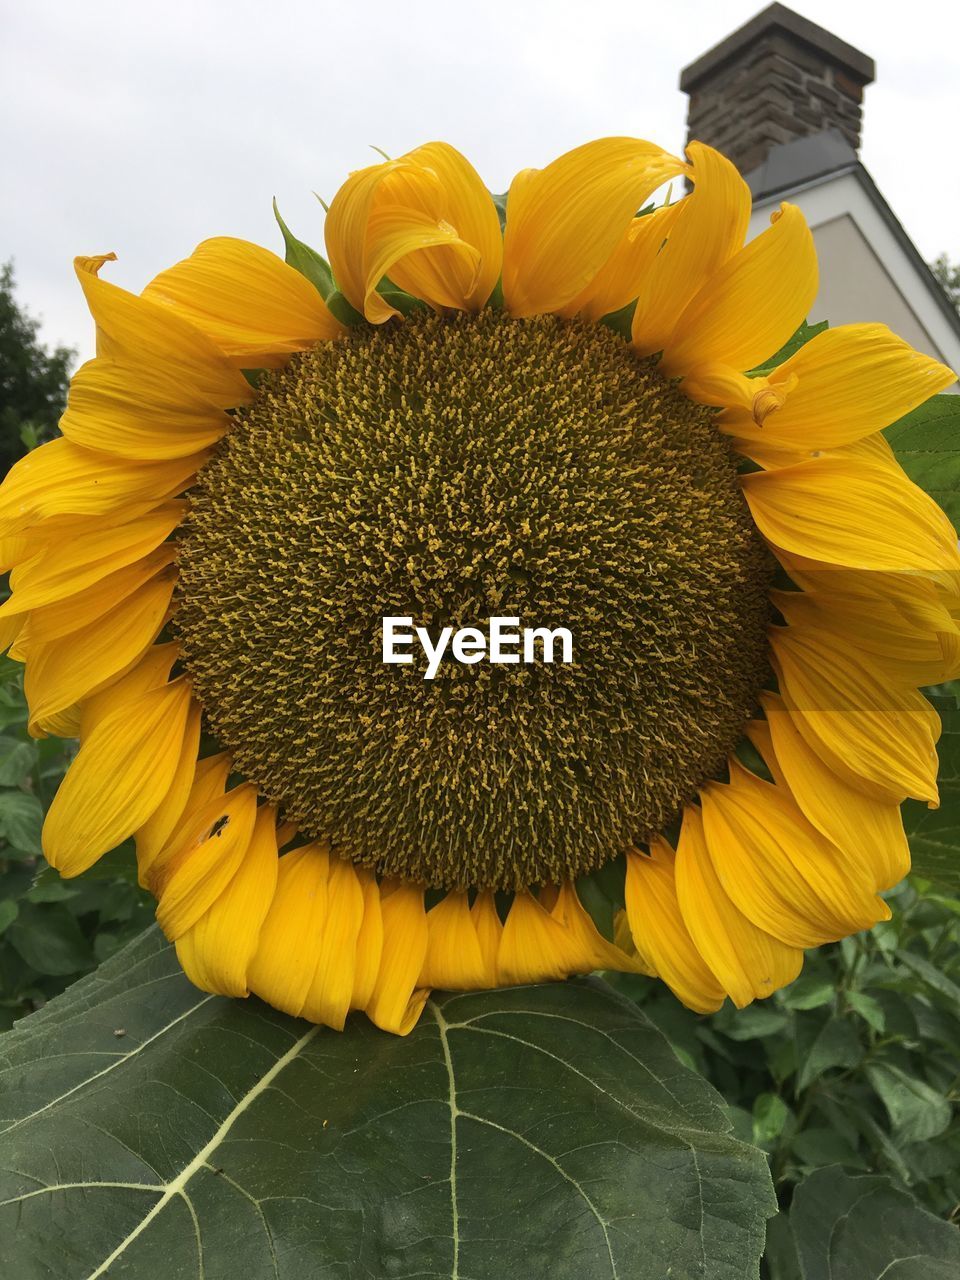 SUNFLOWERS BLOOMING OUTDOORS